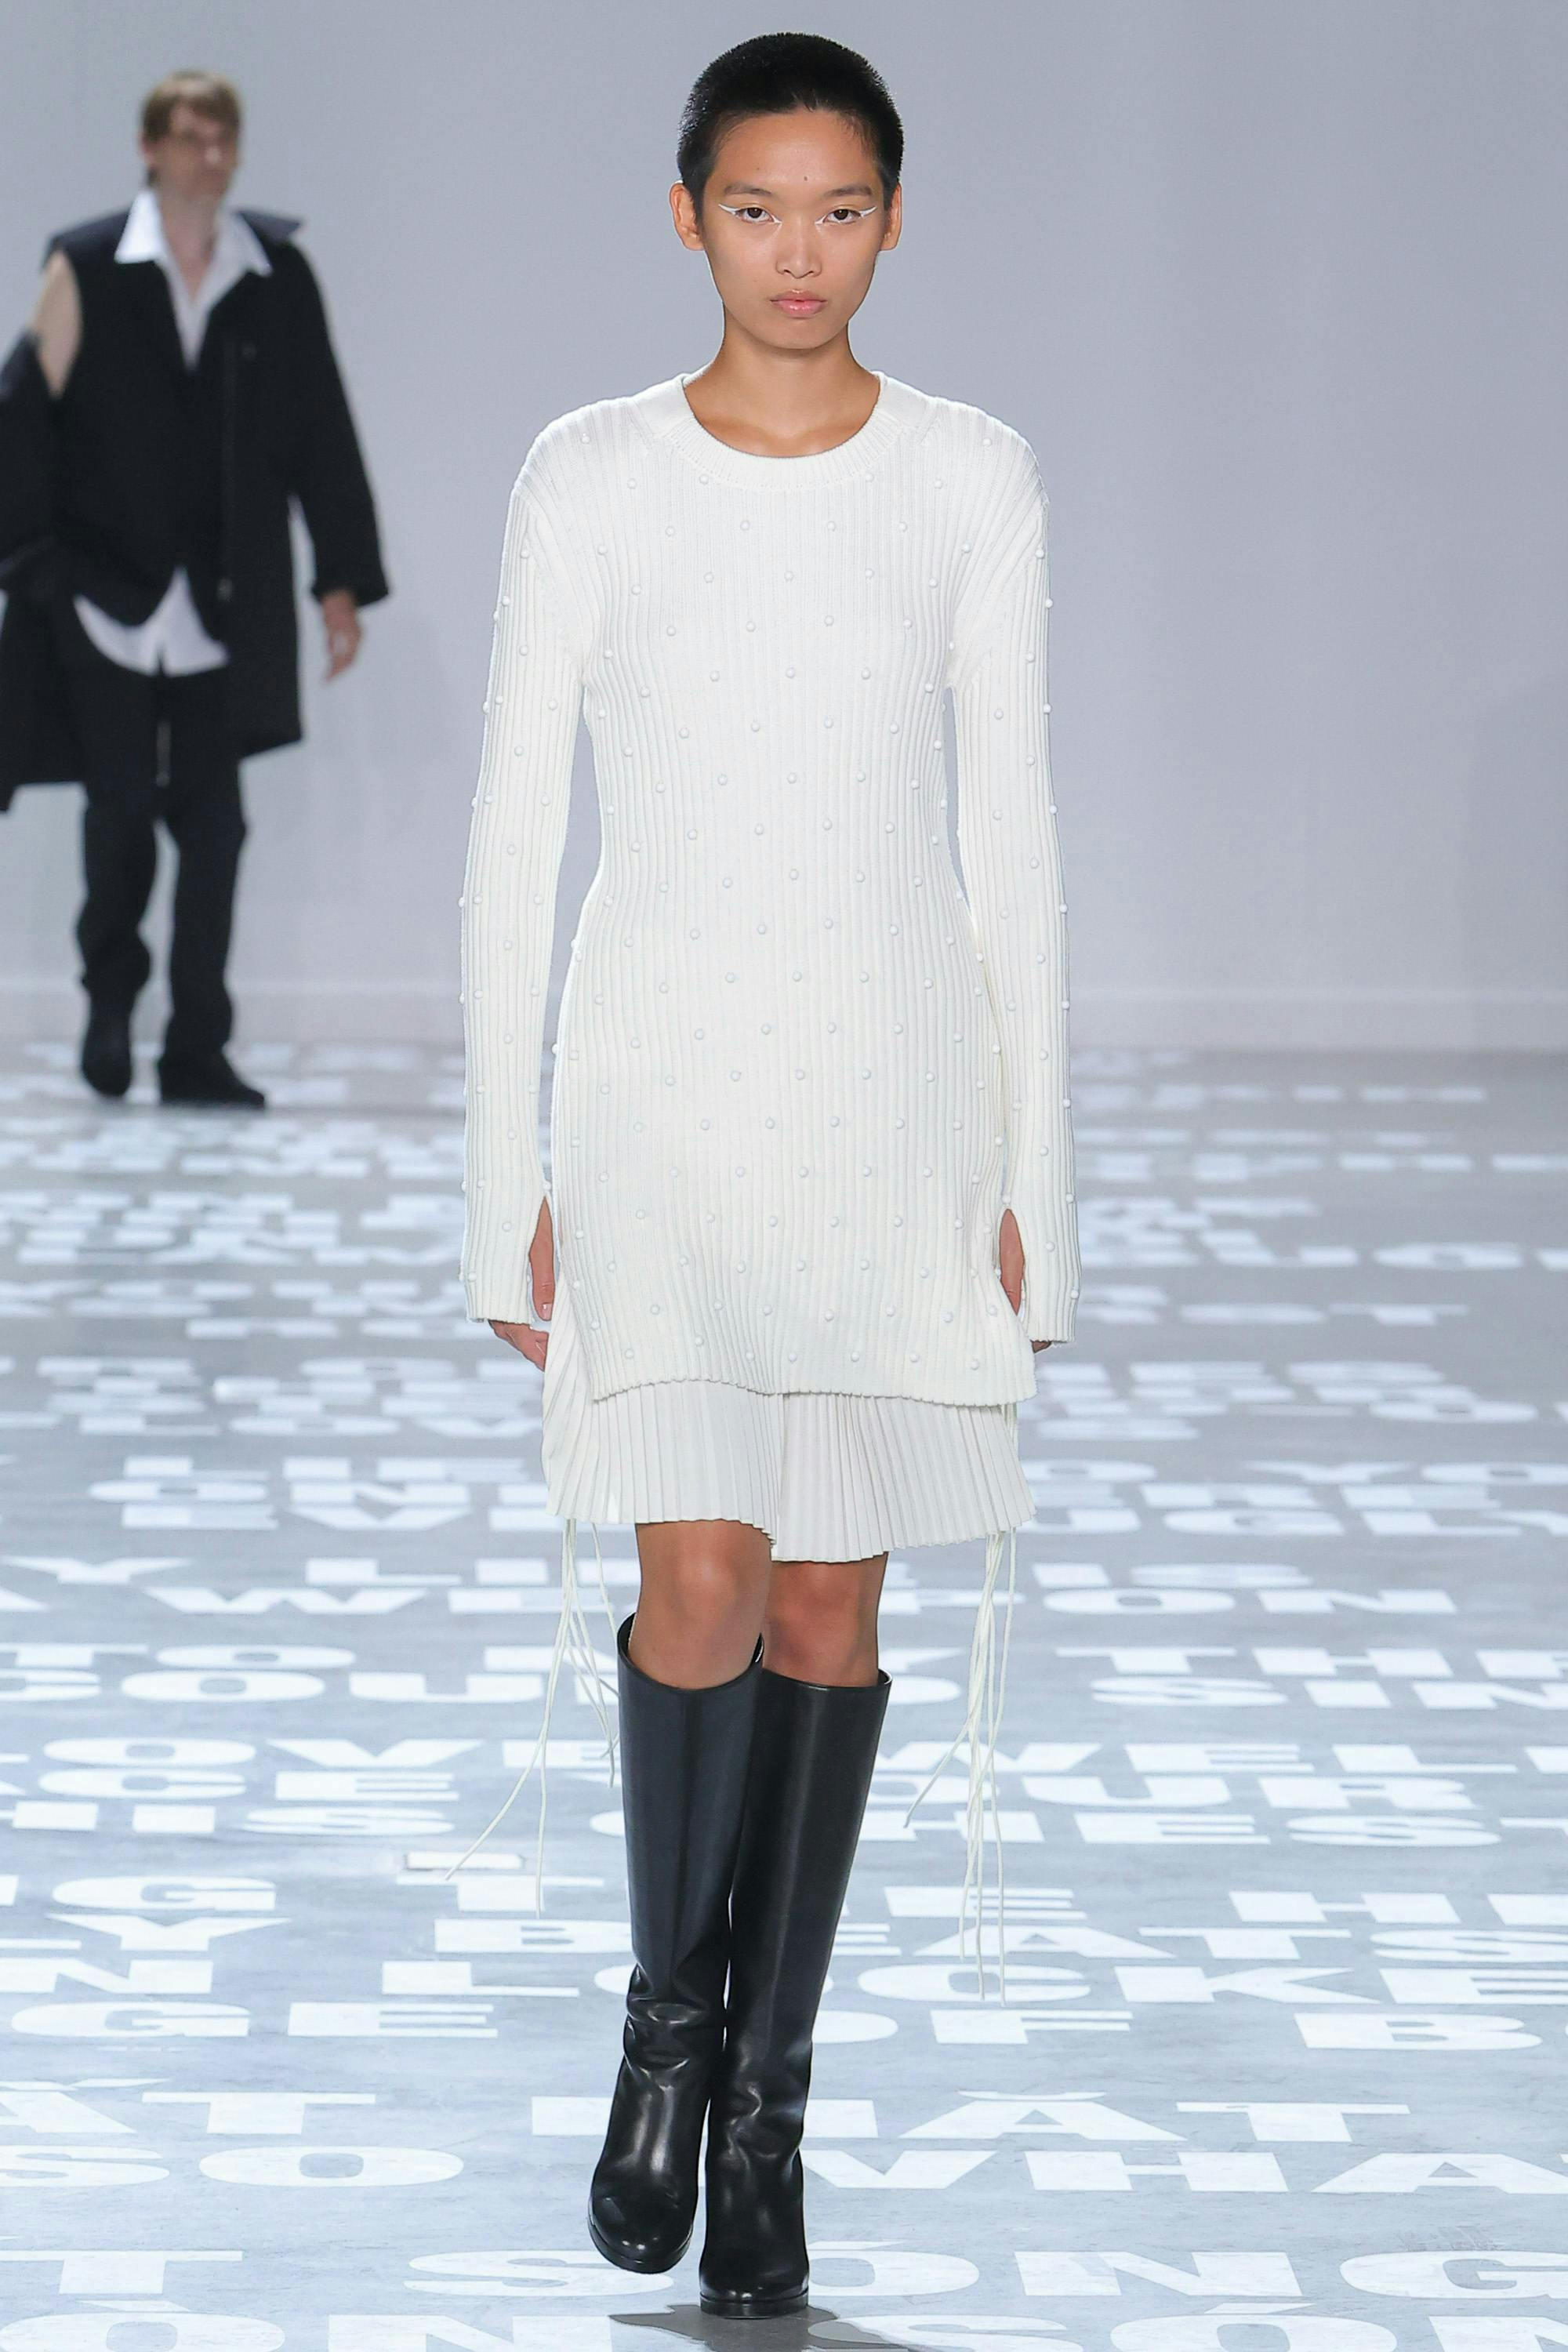 model in white top and skirt with black boots